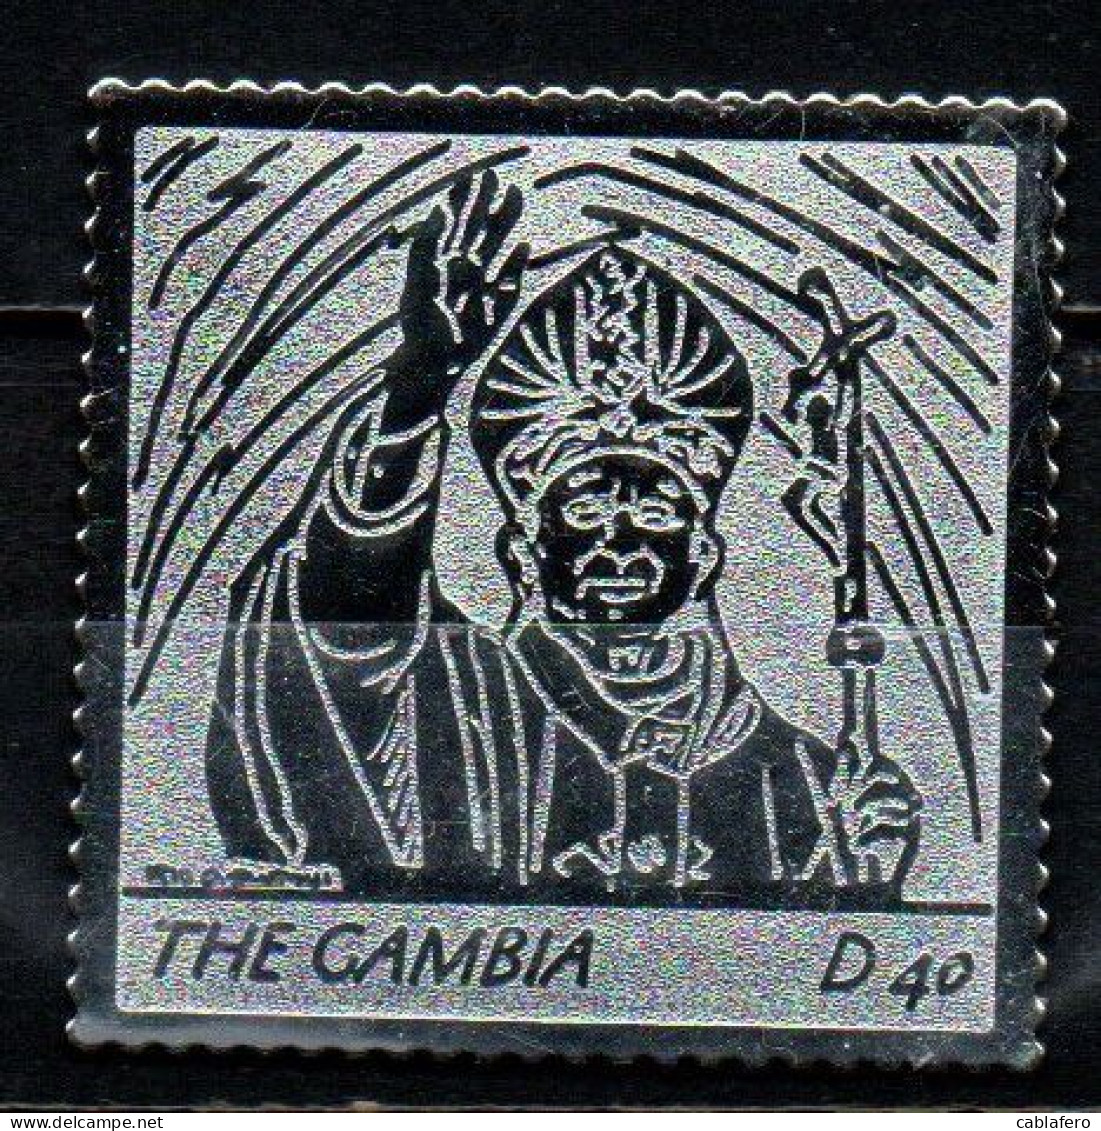 GAMBIA - 2005 - Pope John Paul II (1920-2005) - With Crucifix At Side Of Face - Silver - Autoadesivo - Gambie (1965-...)